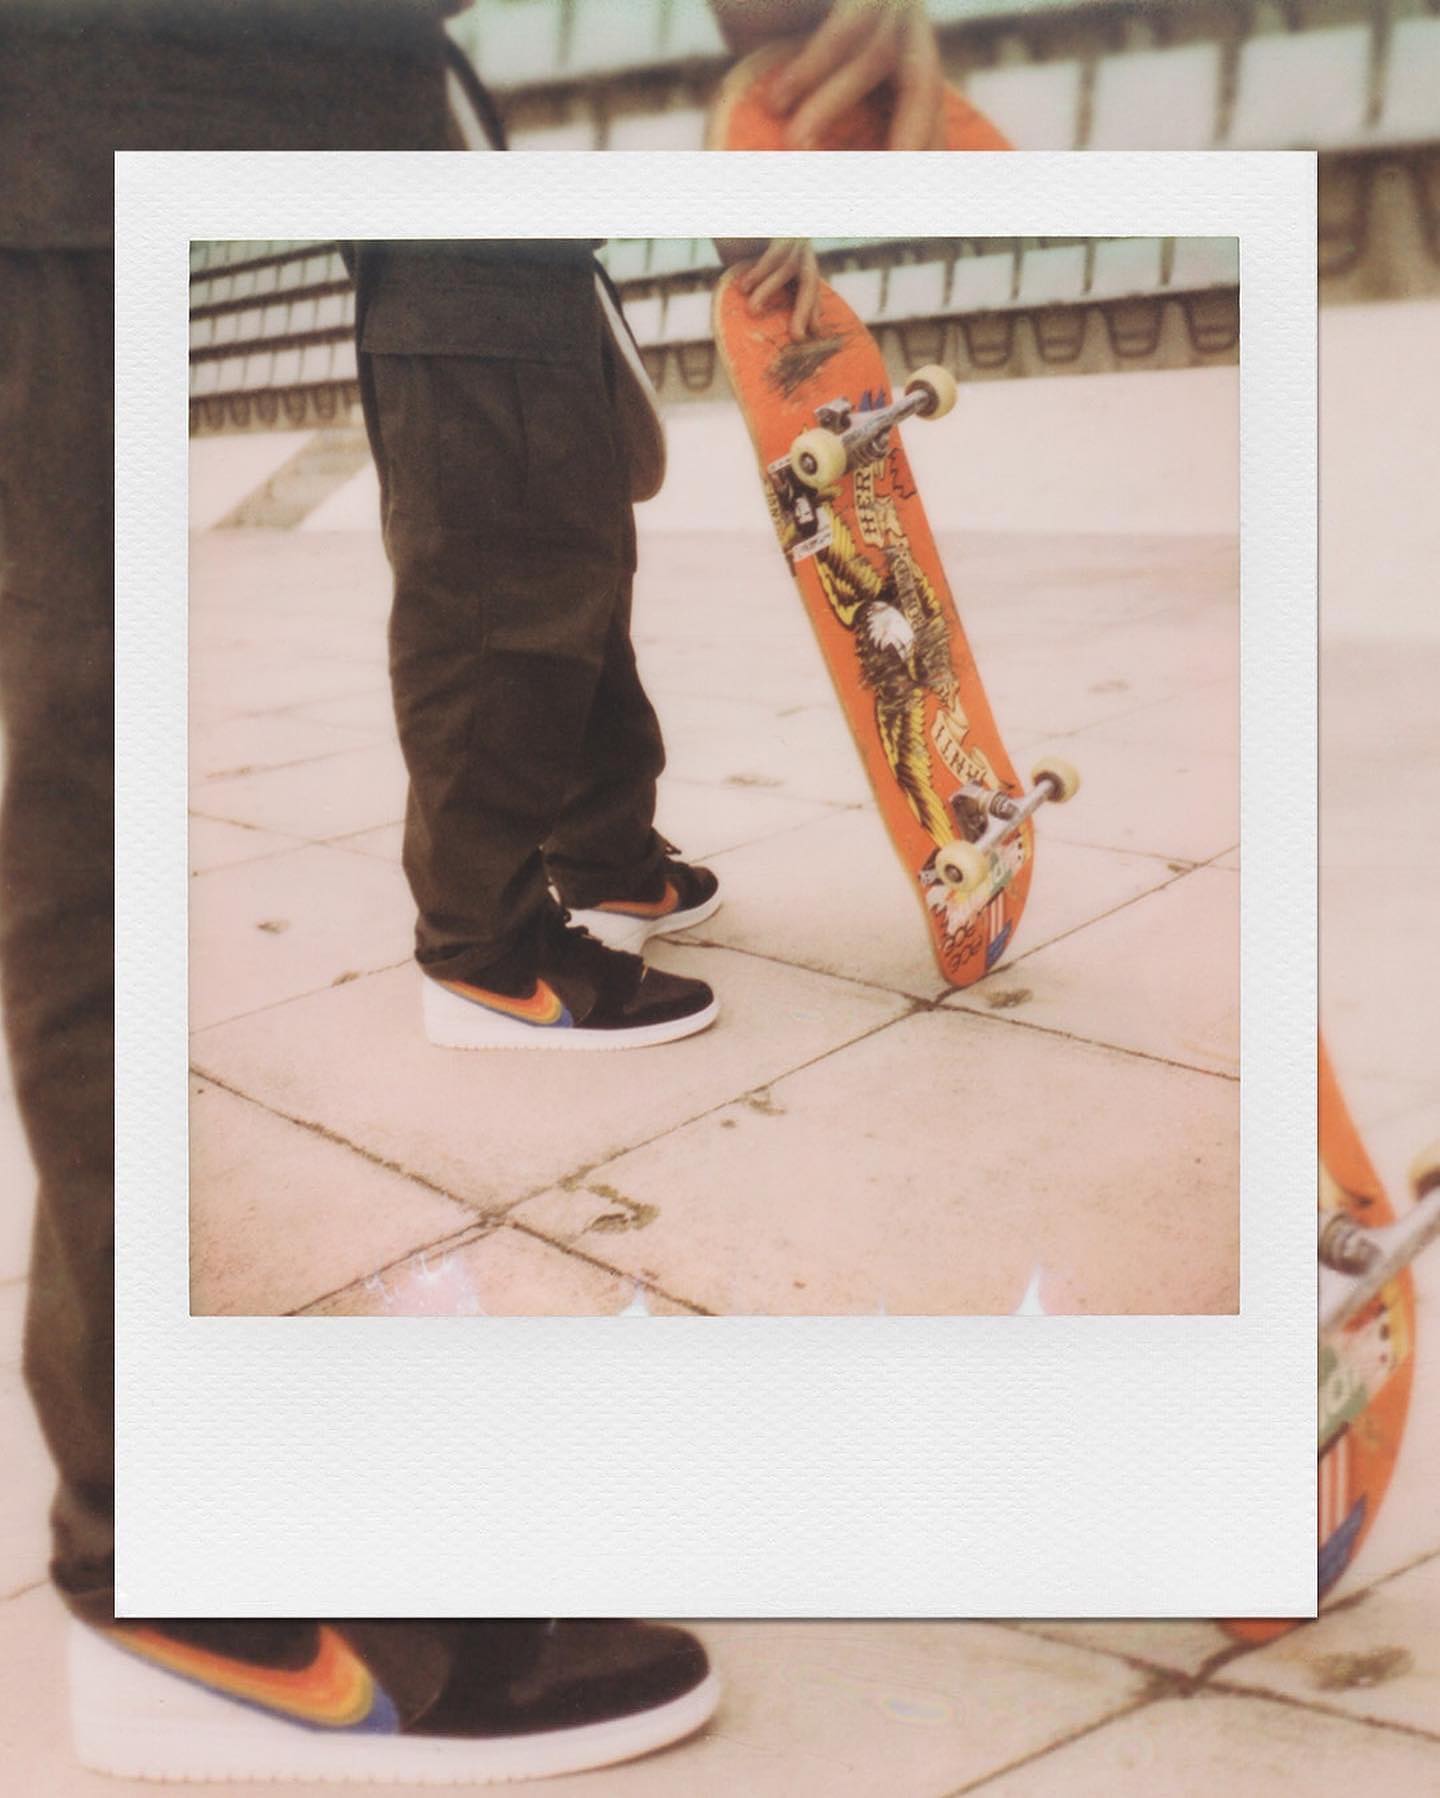 @polaroid x @nikesb コラボレーションのストーリーを @nikesb bio からチェックできます。🗣 @nikesb We followed Sarah Meurle around Barcelona as she photographed Brian Anderson in the upcoming SB Dunk by @Polaroid as they discussed skateboarding’s close ties to creativity, Sarah’s passion for photography, and photography’s role capturing leaders paving the way for female, LGBTQ+, and non-binary representation in skateboarding.Learn more at  in @nikesb bio. The Polaroid Dunk lands in select skate shops and SNKRS Tuesday, April 5.@smeurle_ @brianandersonsb